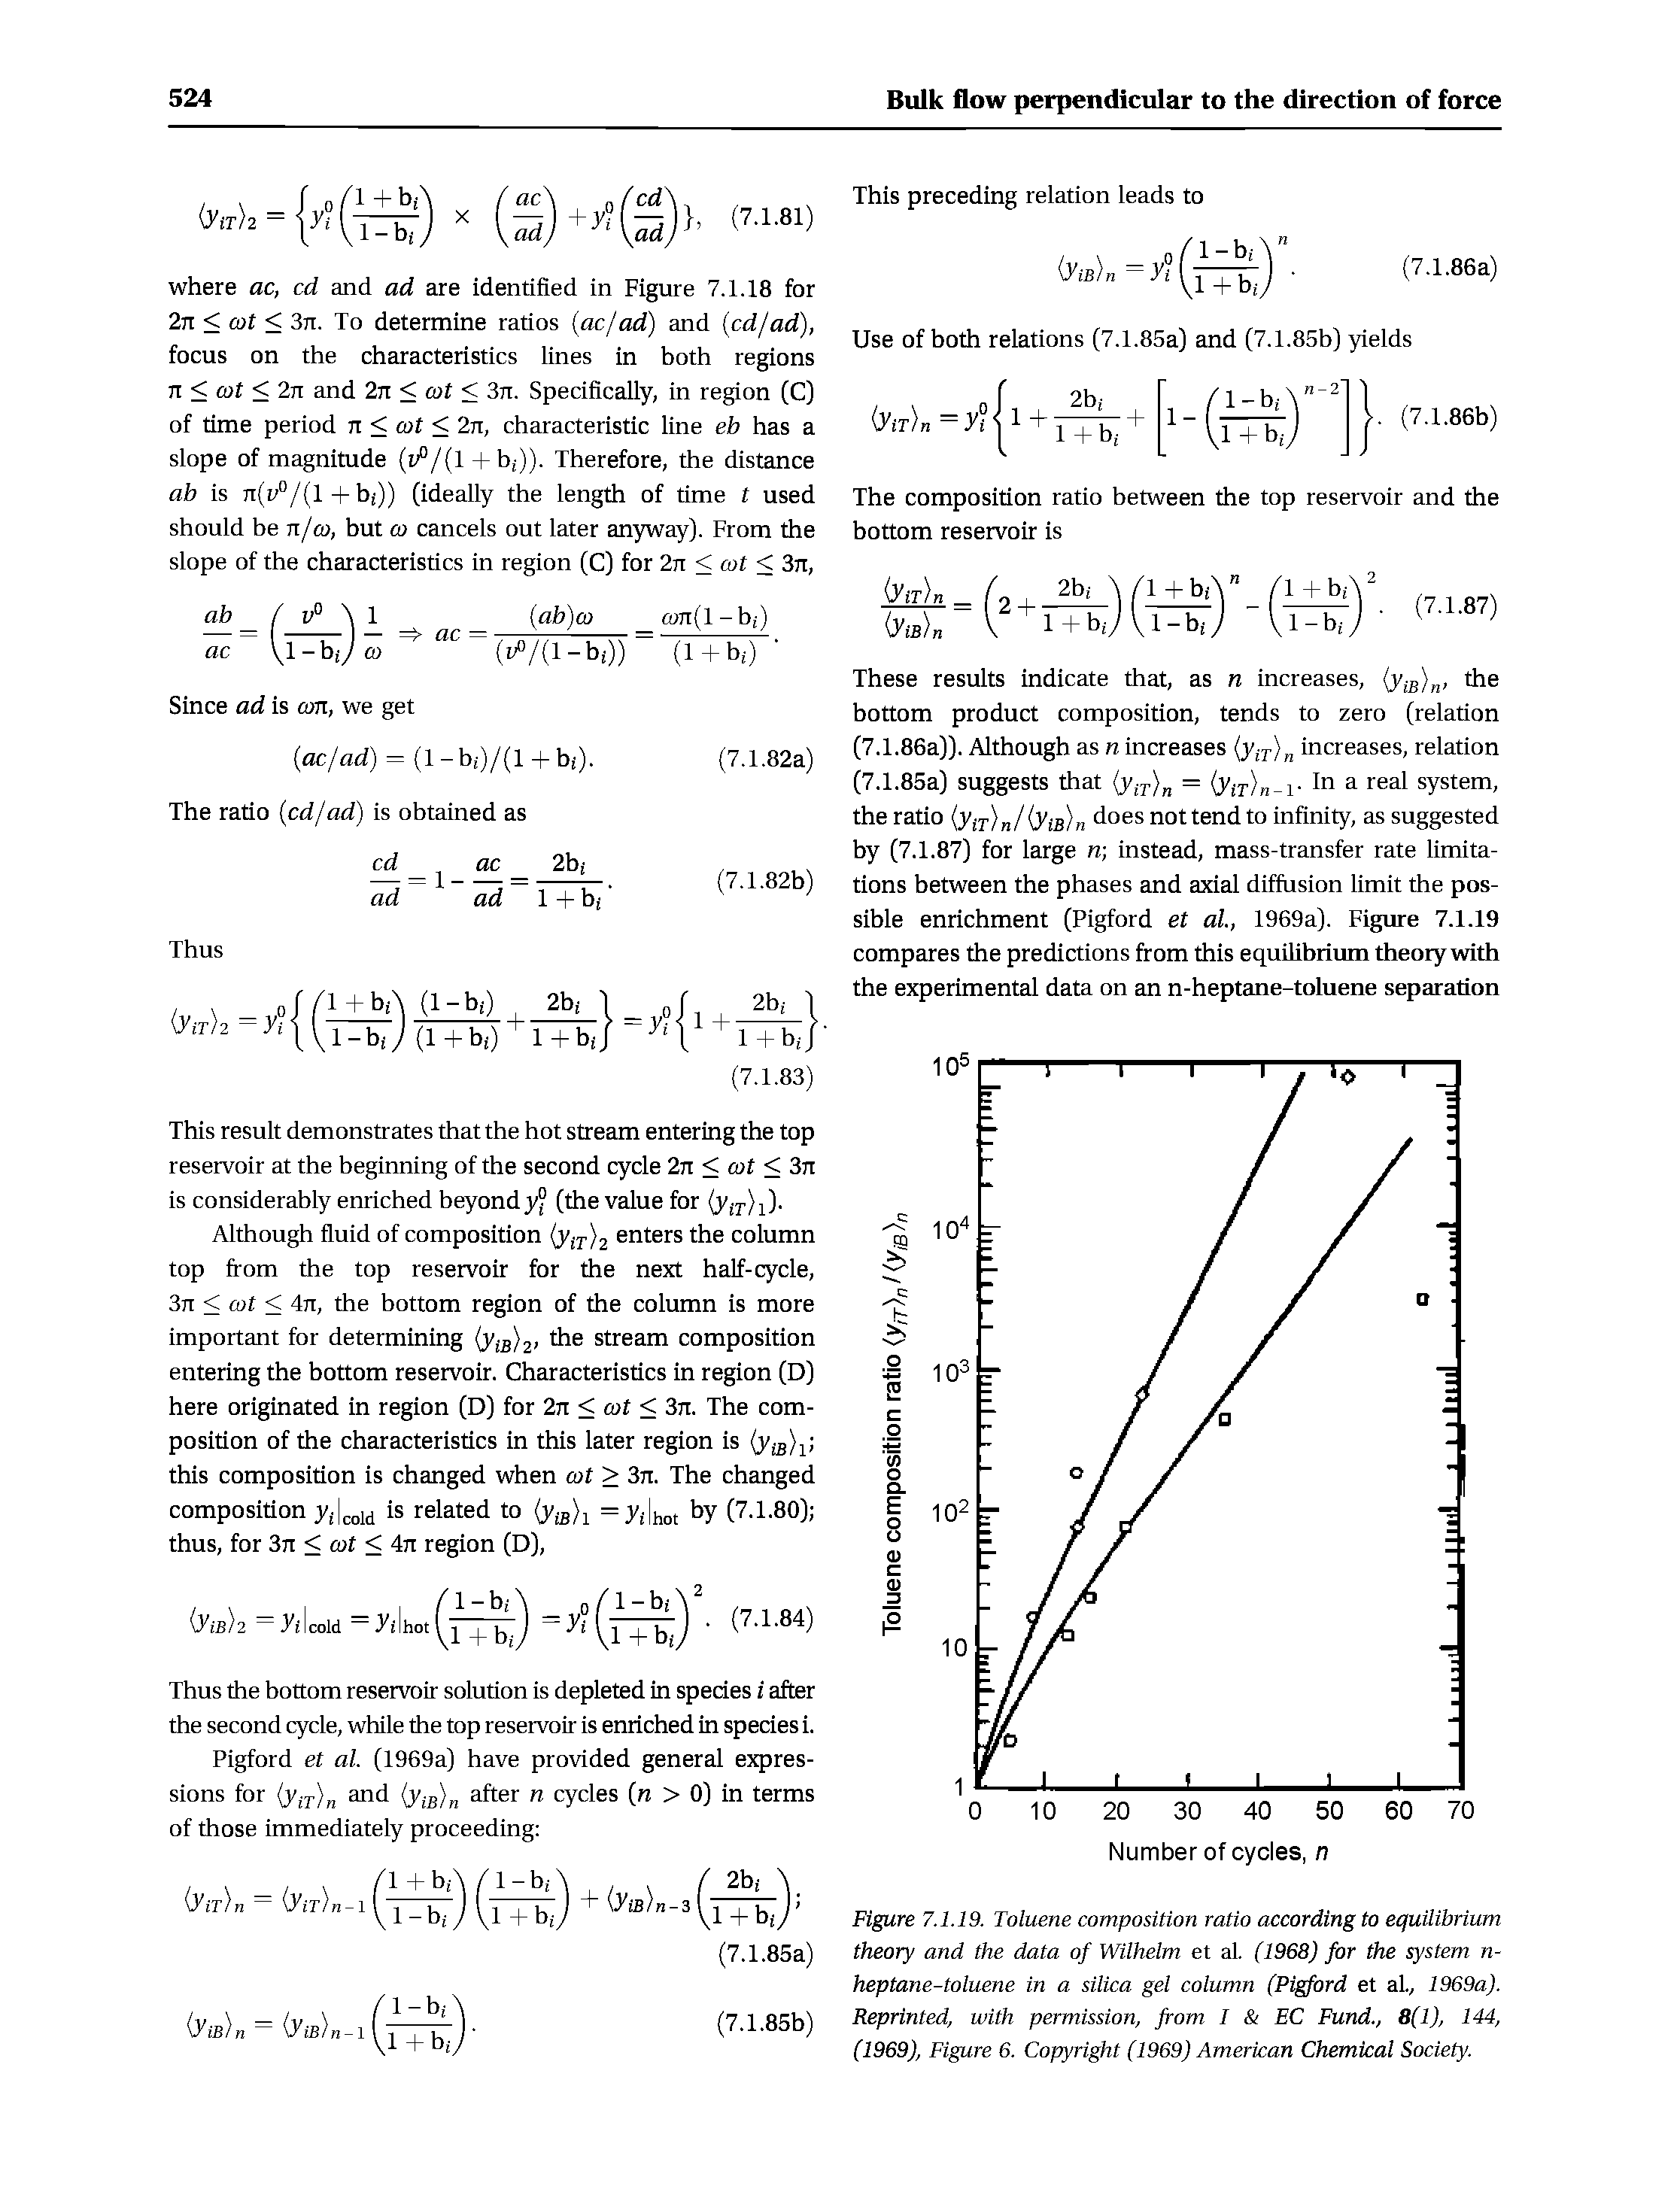 Figure 7.1.19. Toluene composition ratio according to equilibrium theory and the data of Wilhelm et aL (1968) for the system n-heptane-toluene in a silica gel column (Pigford et al, 1969a). Reprinted, with permission, from I EC Fund., 8(1), 144, (1969), Figure 6. Copyright (1969) American Chemical Society.